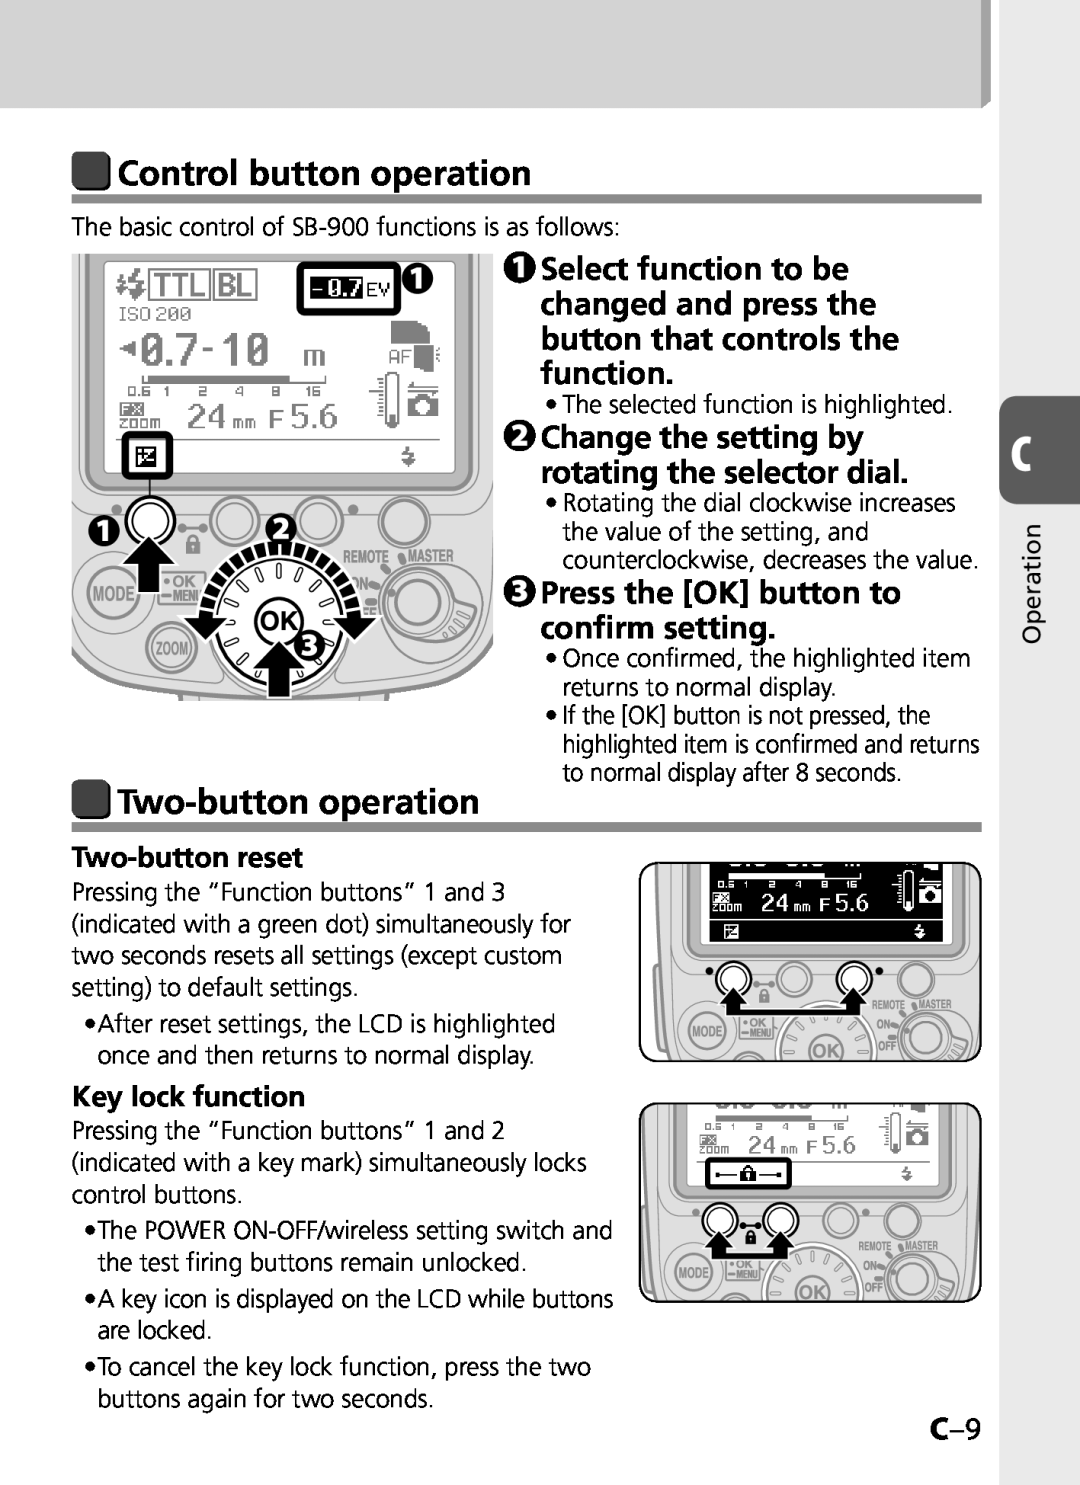 Univex SB-900 user manual Control button operation, Two-buttonoperation, Change the setting by rotating the selector dial 